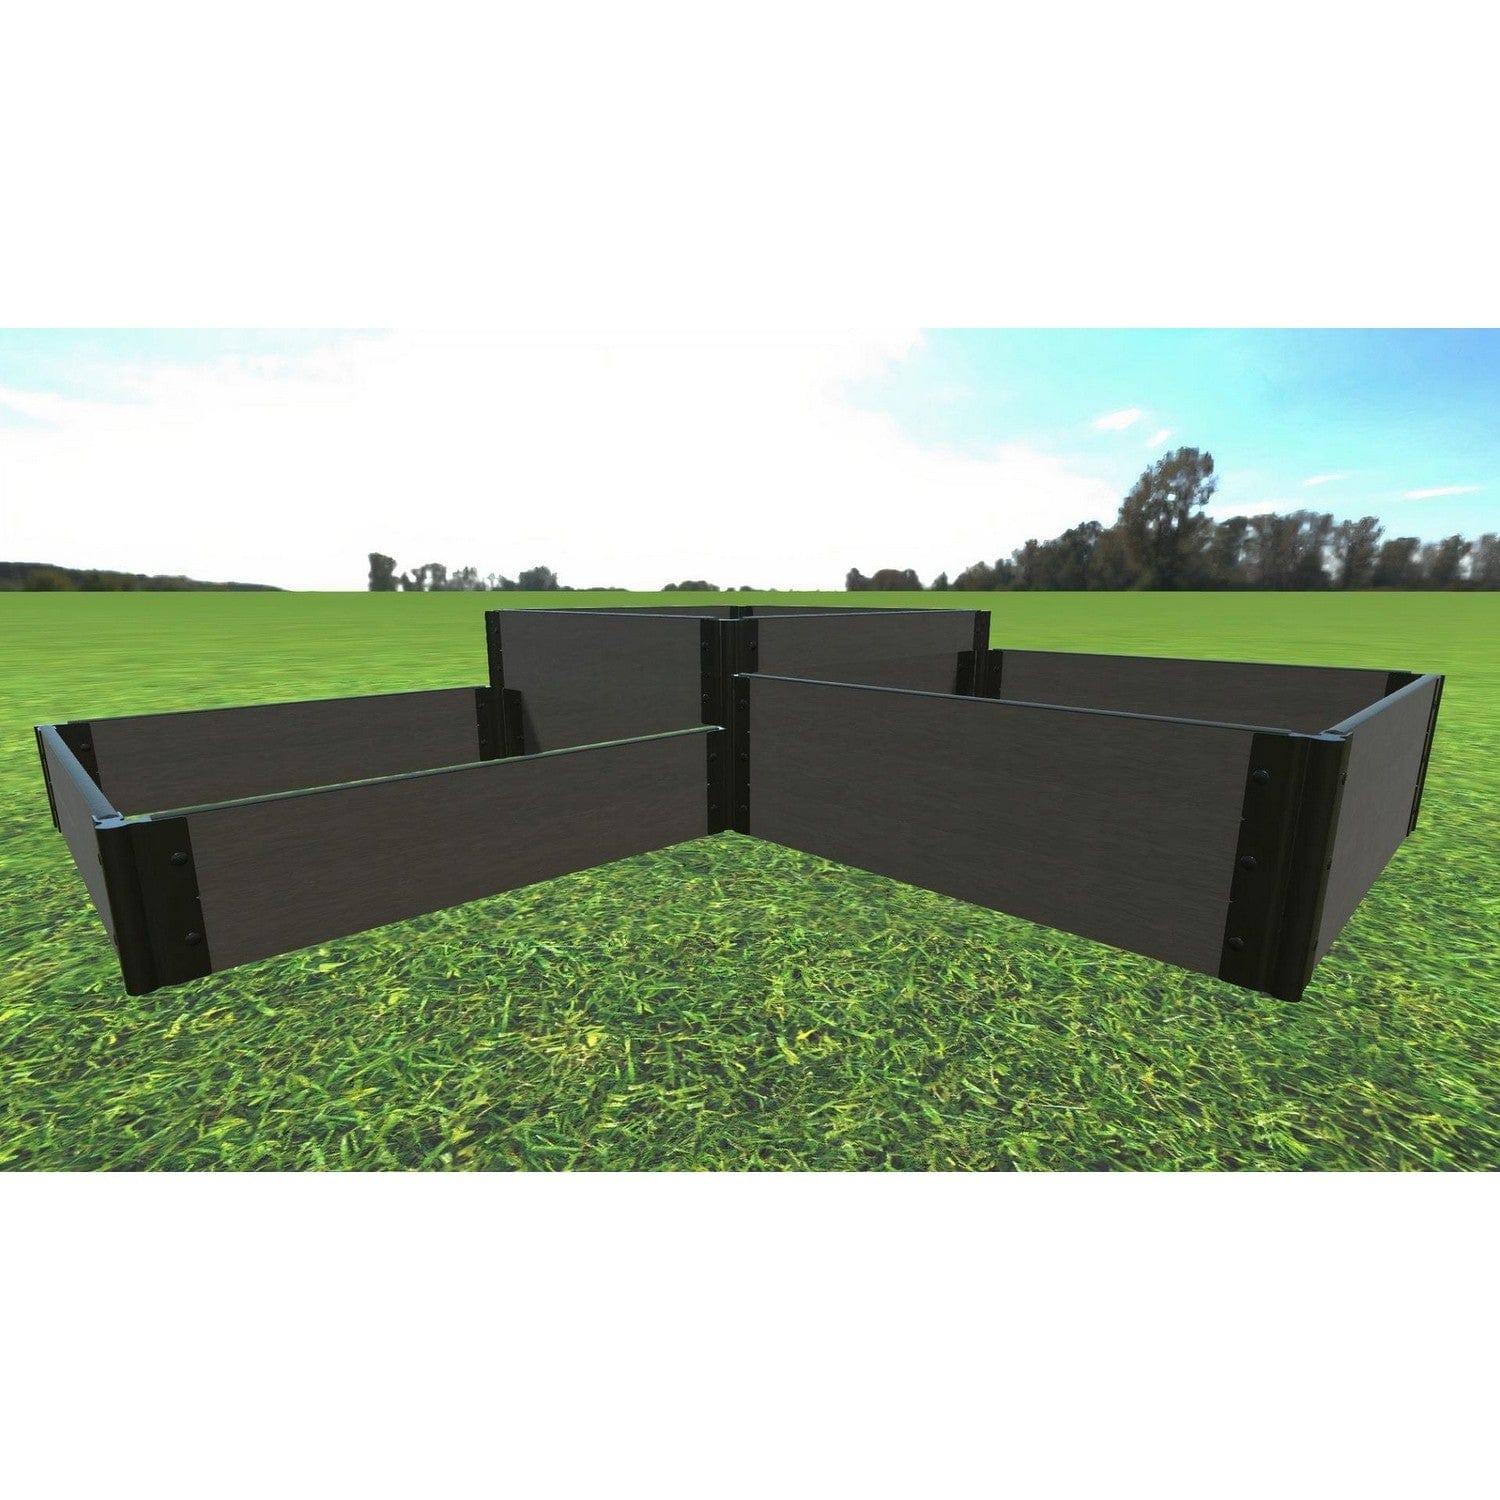 Frame It All Gardening Accessories Frame It All | Tool-Free Fort Knox Straight Corner Raised Garden Bed (Tri-Level) 8' X 8' X 22" - Weathered Wood - 1" Profile 800002022